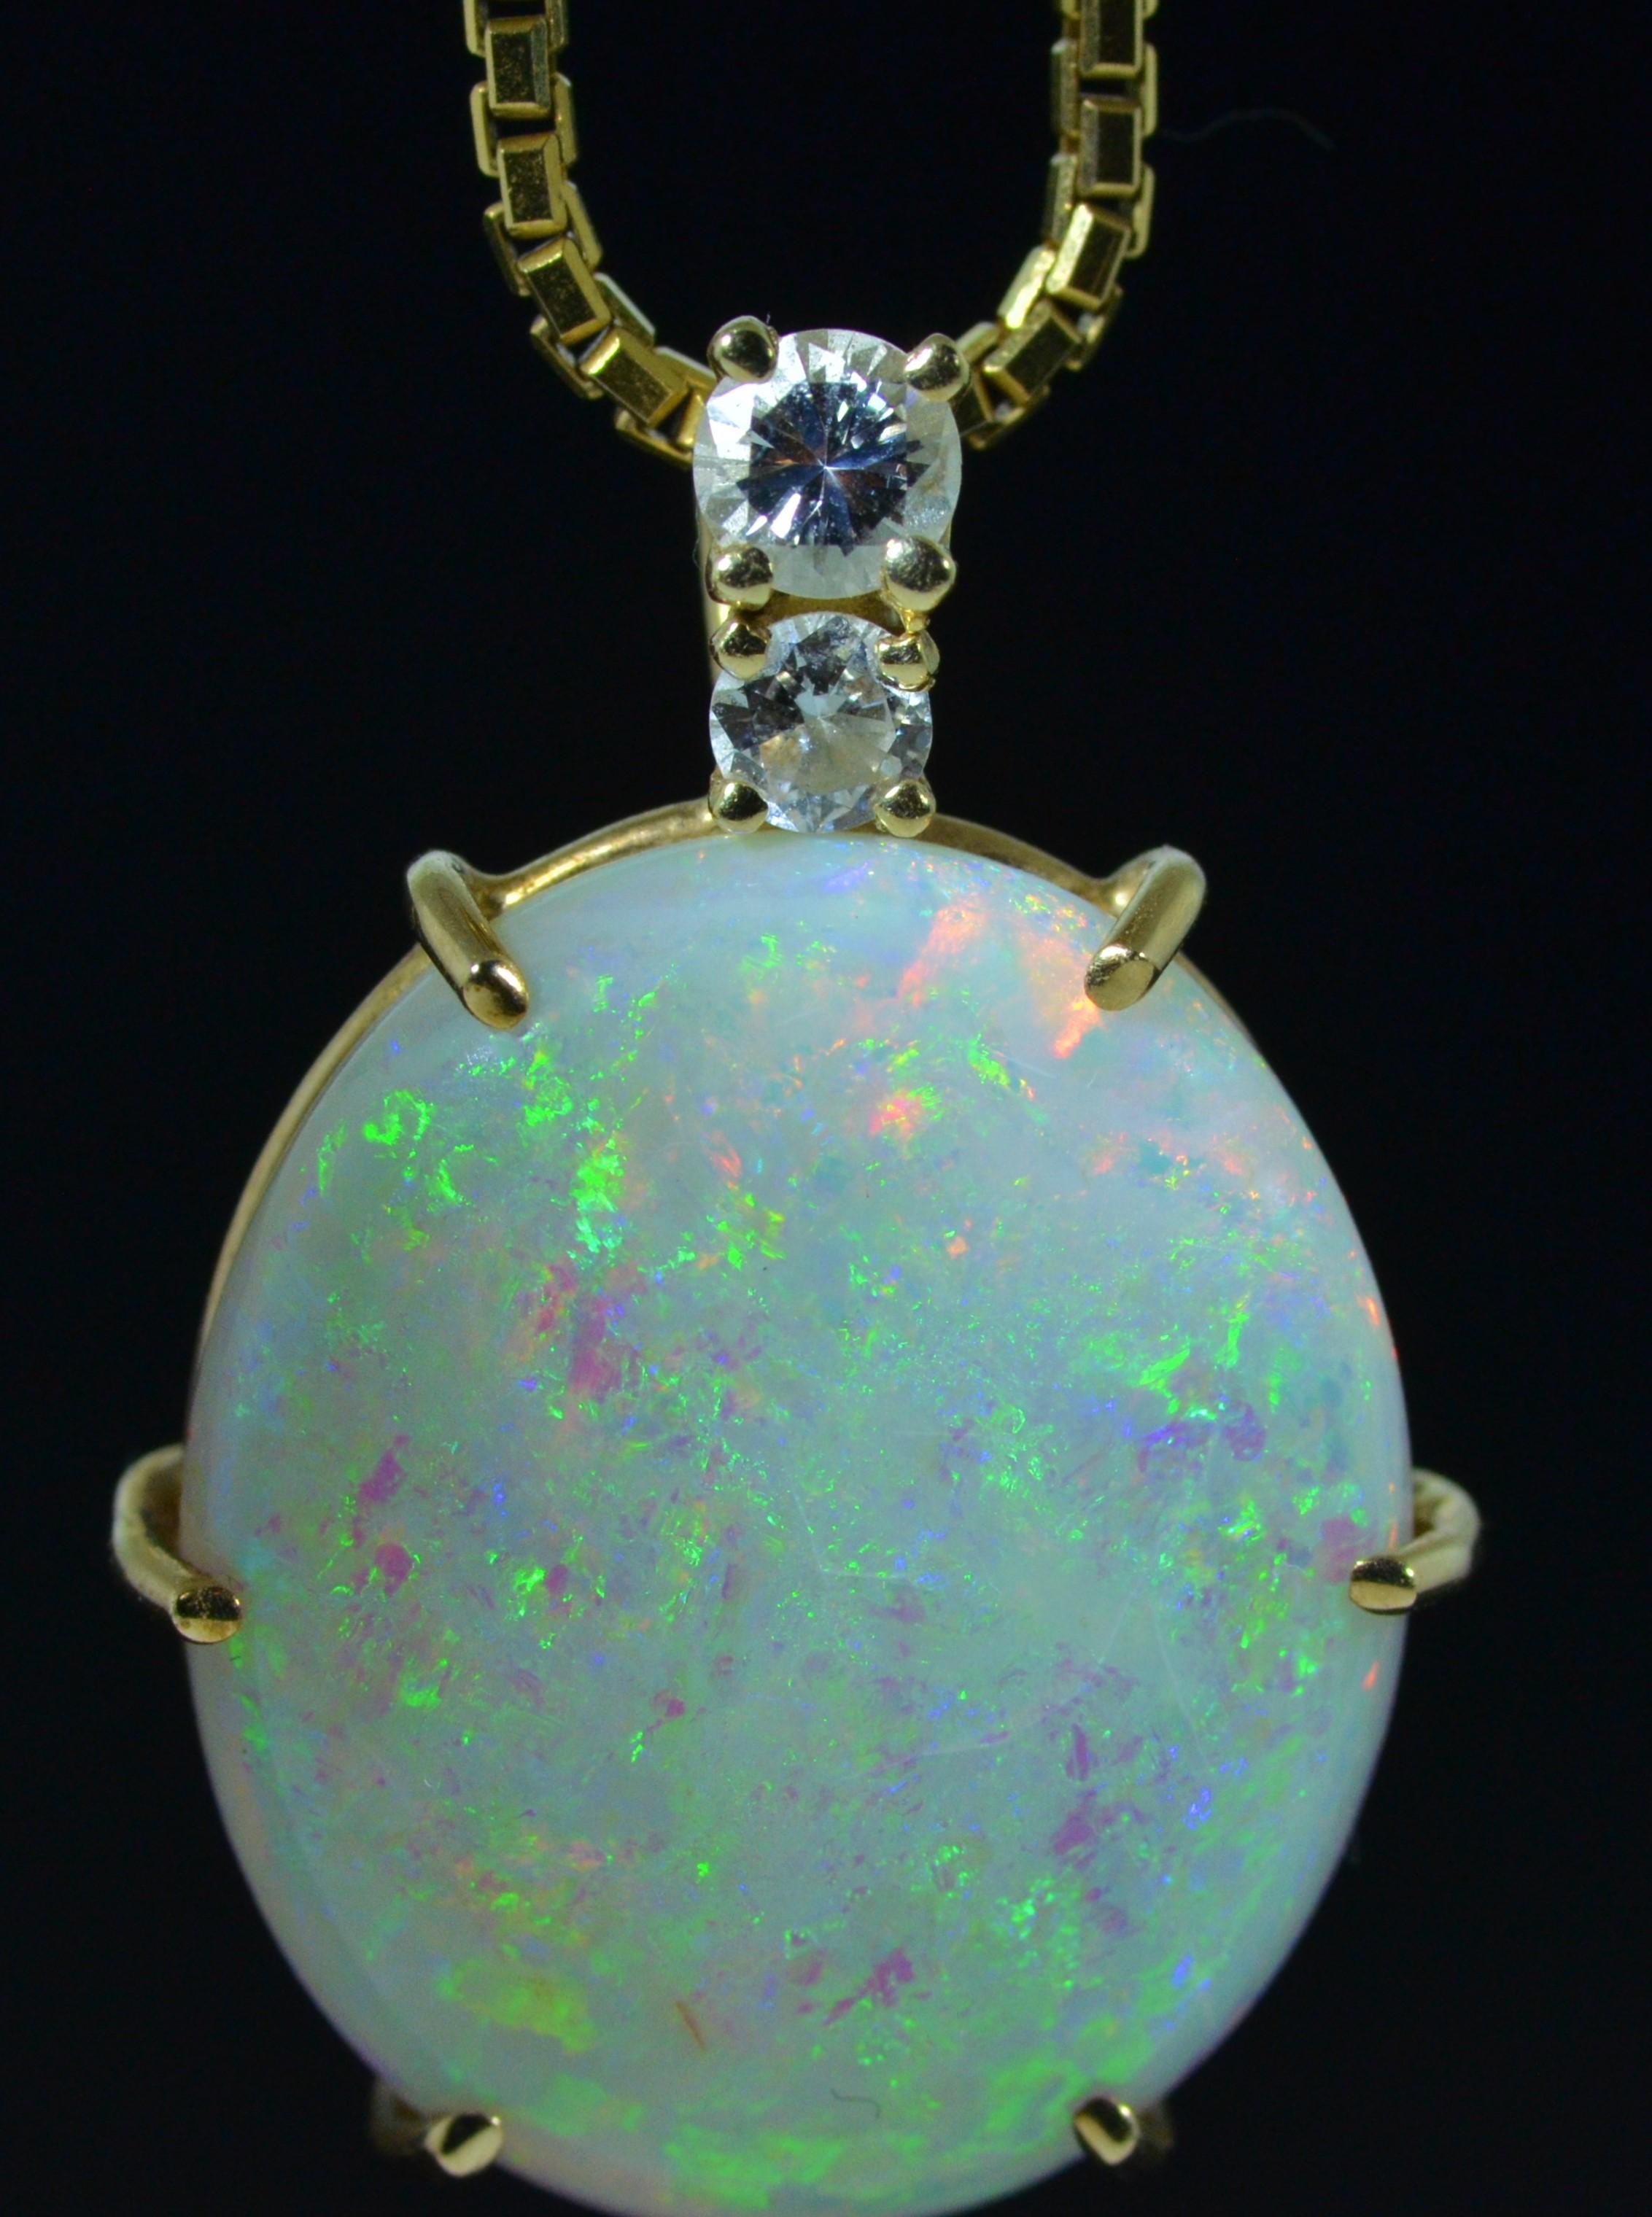 Outstanding pendant six (6) prong set with Impressive 11 Carat Fine Australian Opal.  Above the Oval shaped cabochon are two Round brilliant cut Diamonds. This opal is a true showpiece and absolutely incredible in nature!  Photographs do not do it